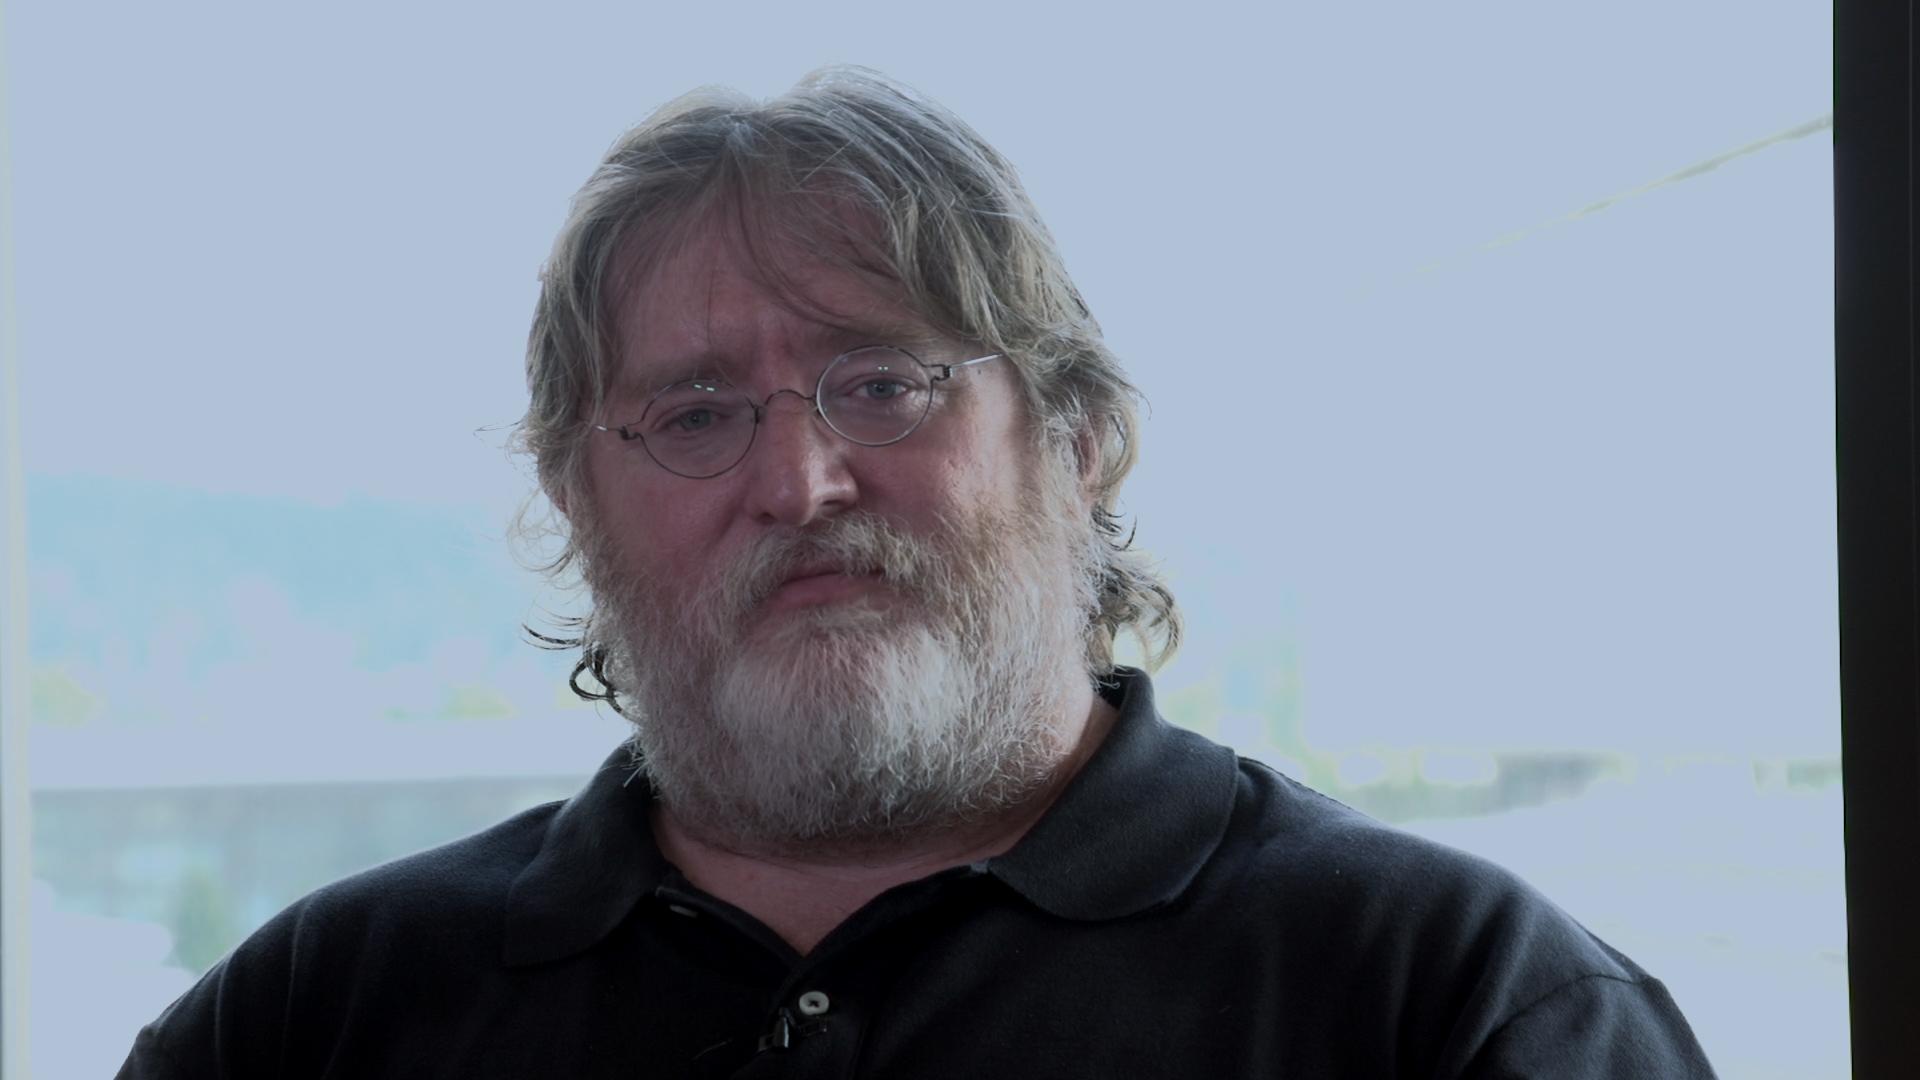 Collection of Gabe Newell Wallpaper (image in Collection)